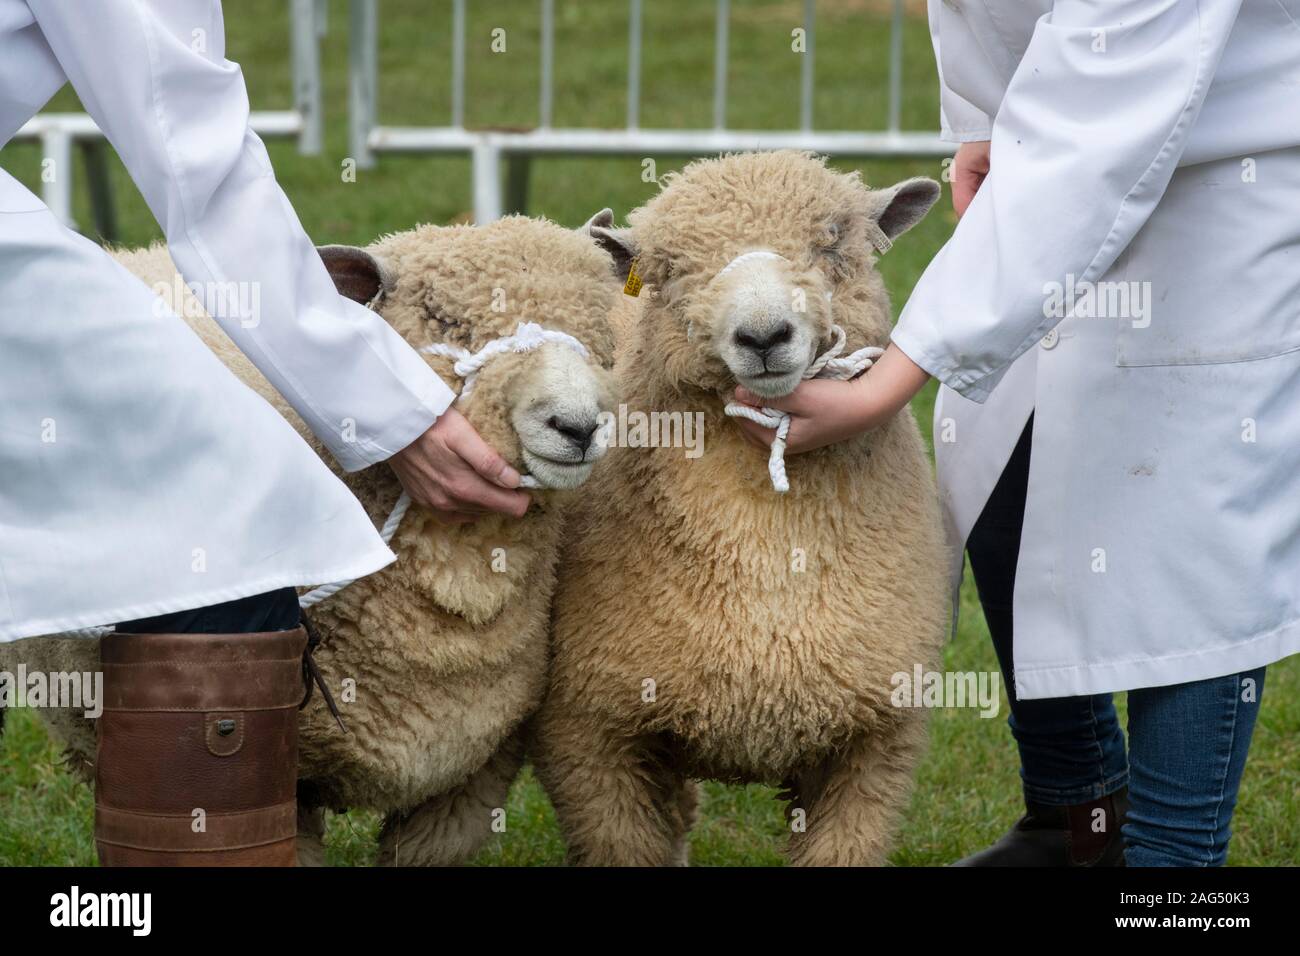 Ovis aries. Ryeland sheep on show at an Agricultural show. UK Stock Photo